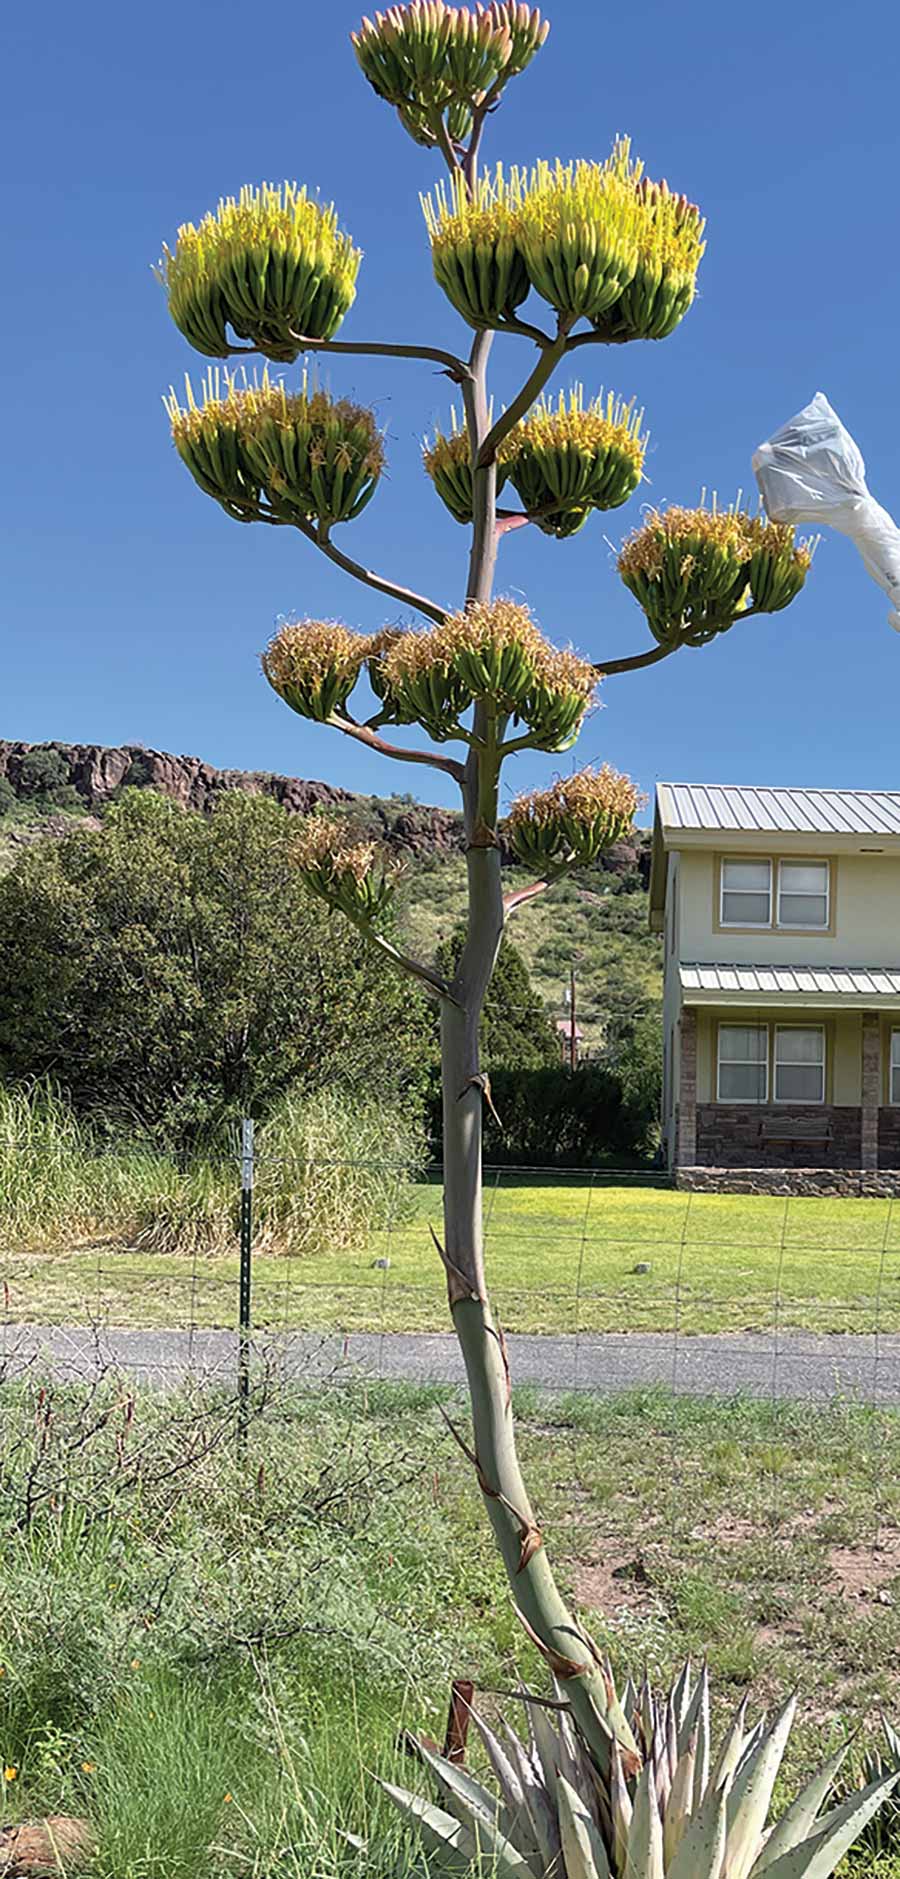 A portrait photograph of a long skinny green/yellow agave flower tree situated in a residential neighborhood area nearby a street and house on a bright sunny day